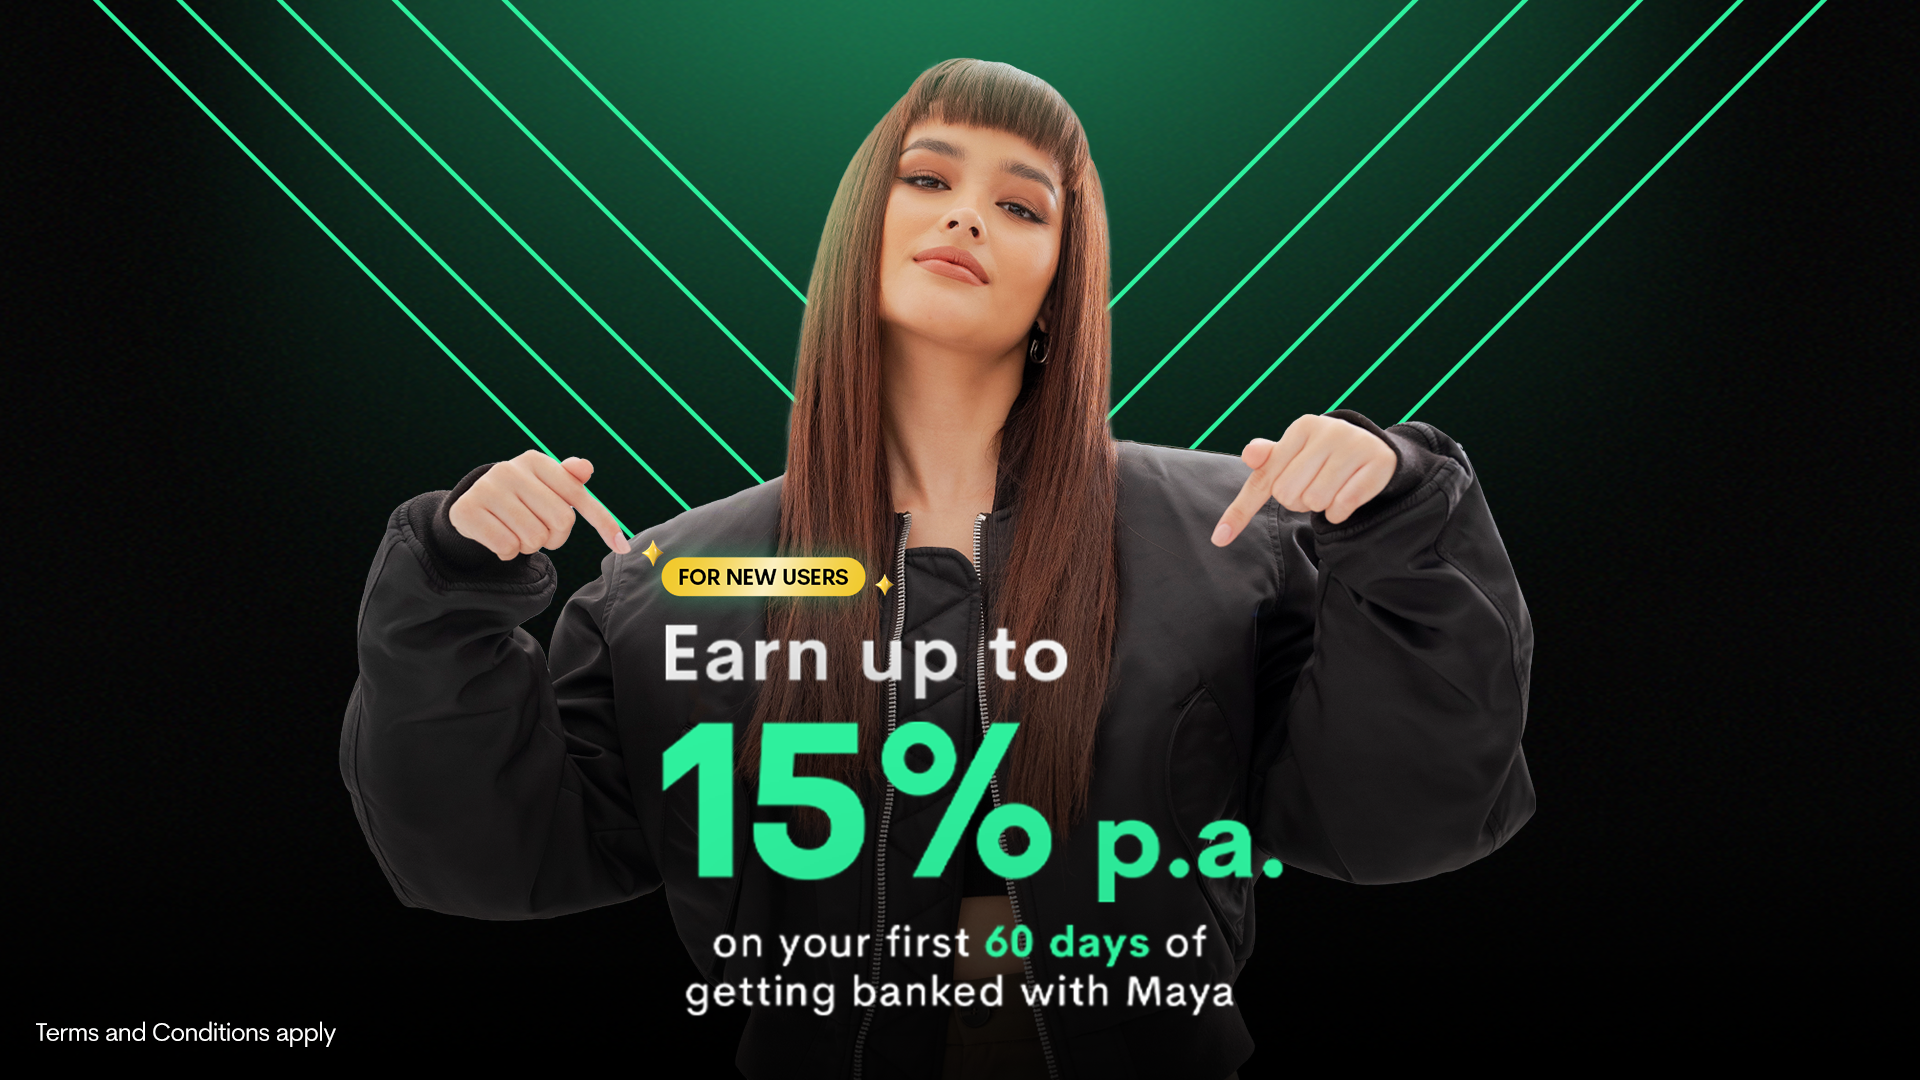 Get up to 14% p.a. for 60 days when you move to Maya today!